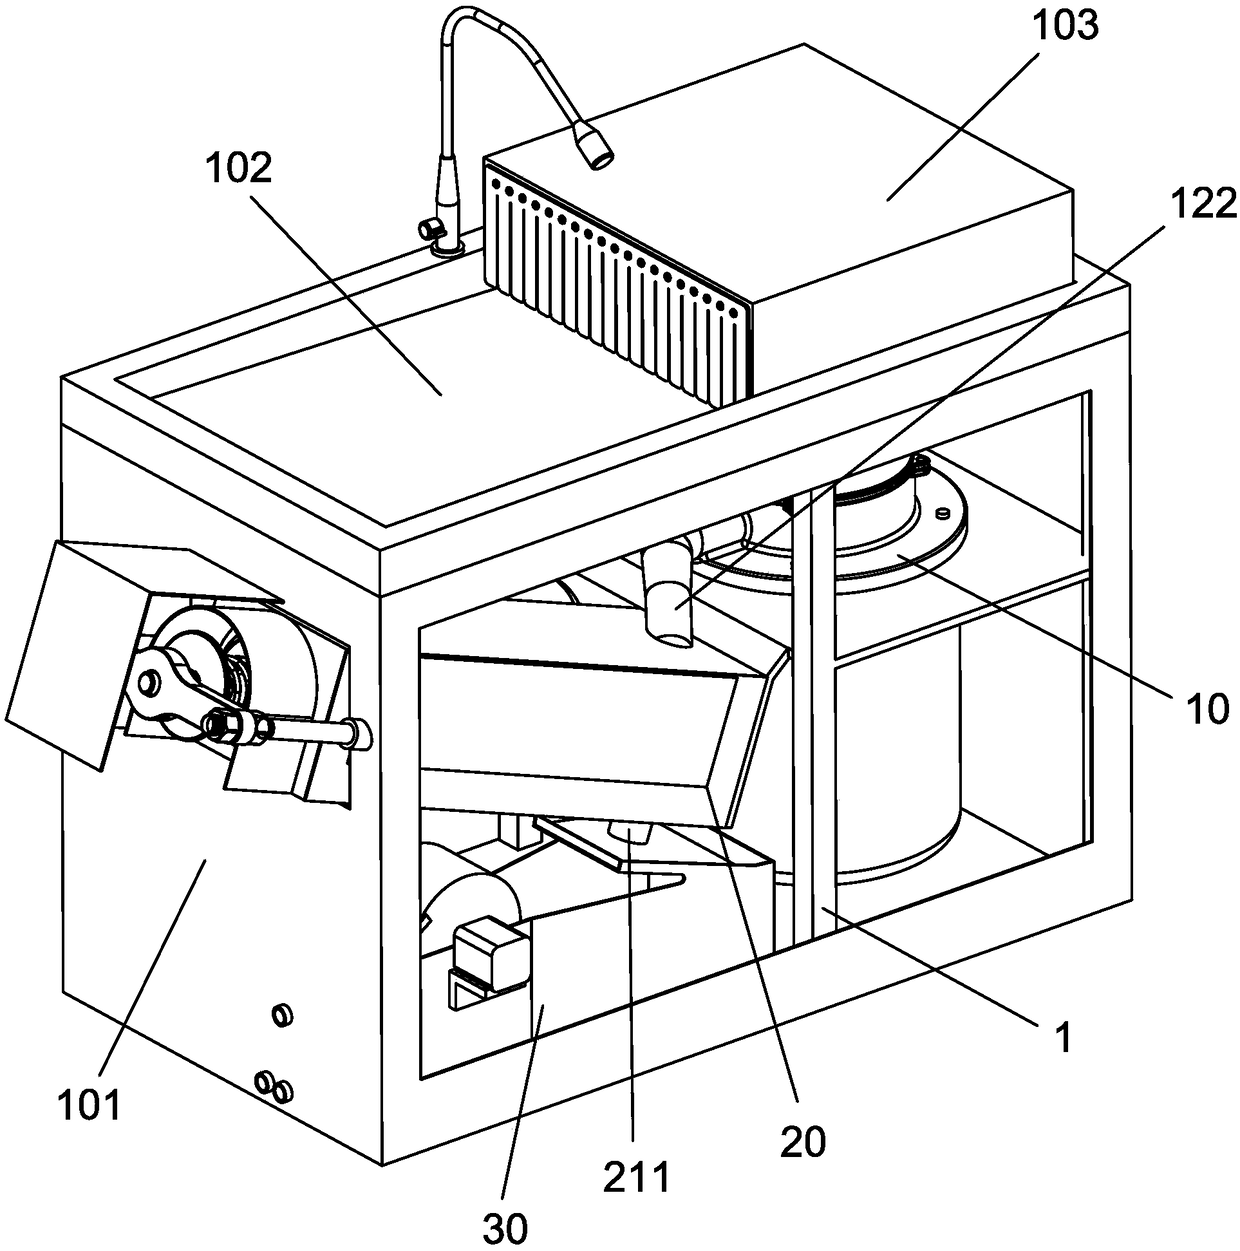 Food waste processing device